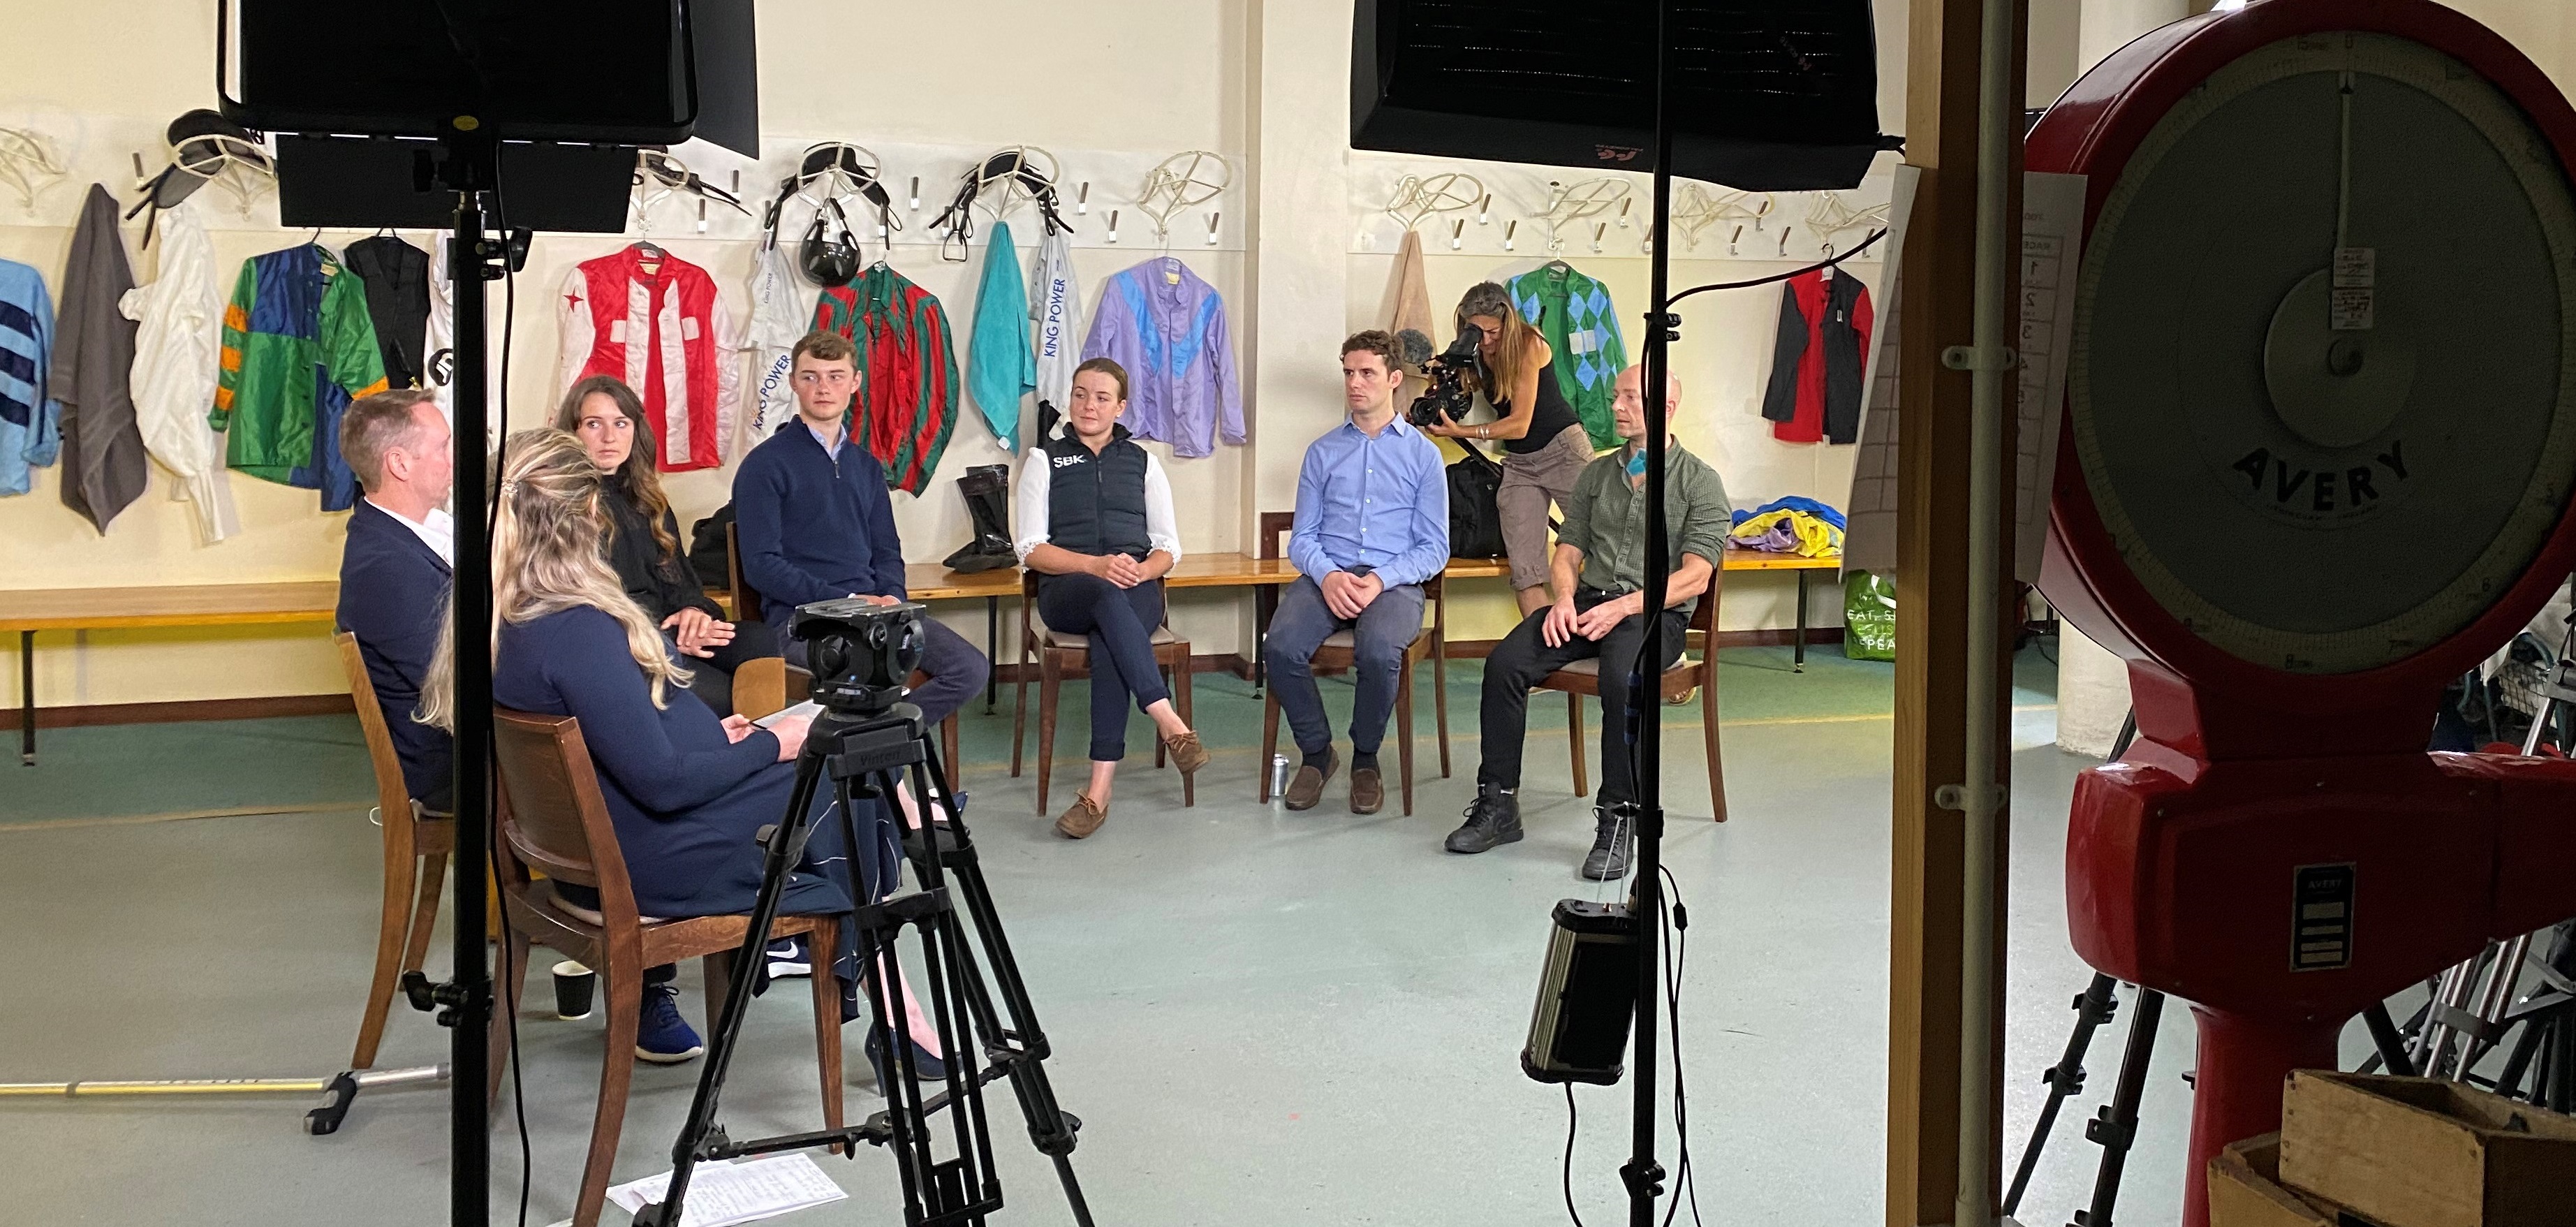 New Jockey Matters Films focus on Respect and Inclusion in the Weighing Room